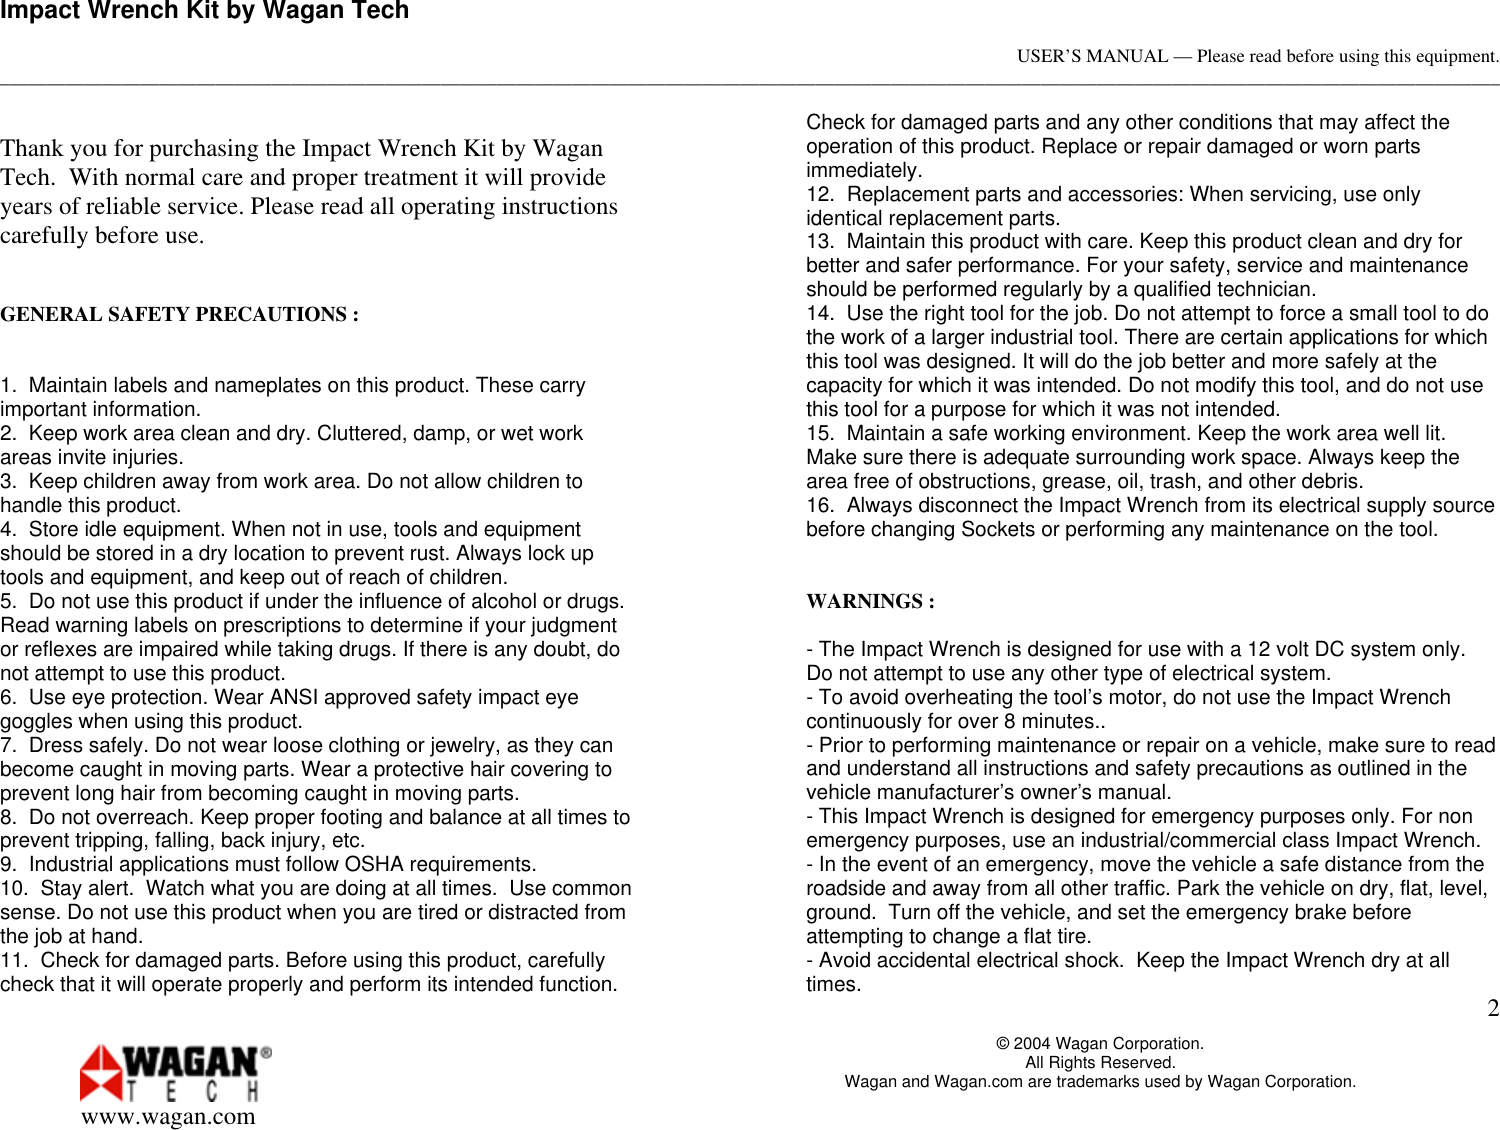 Page 2 of 4 - Wagan Wagan-2257-Users-Manual- Your 350 Watt Power Inverter Converts 12-volt Vehicle Battery Into 115 Volts Of AC  Wagan-2257-users-manual